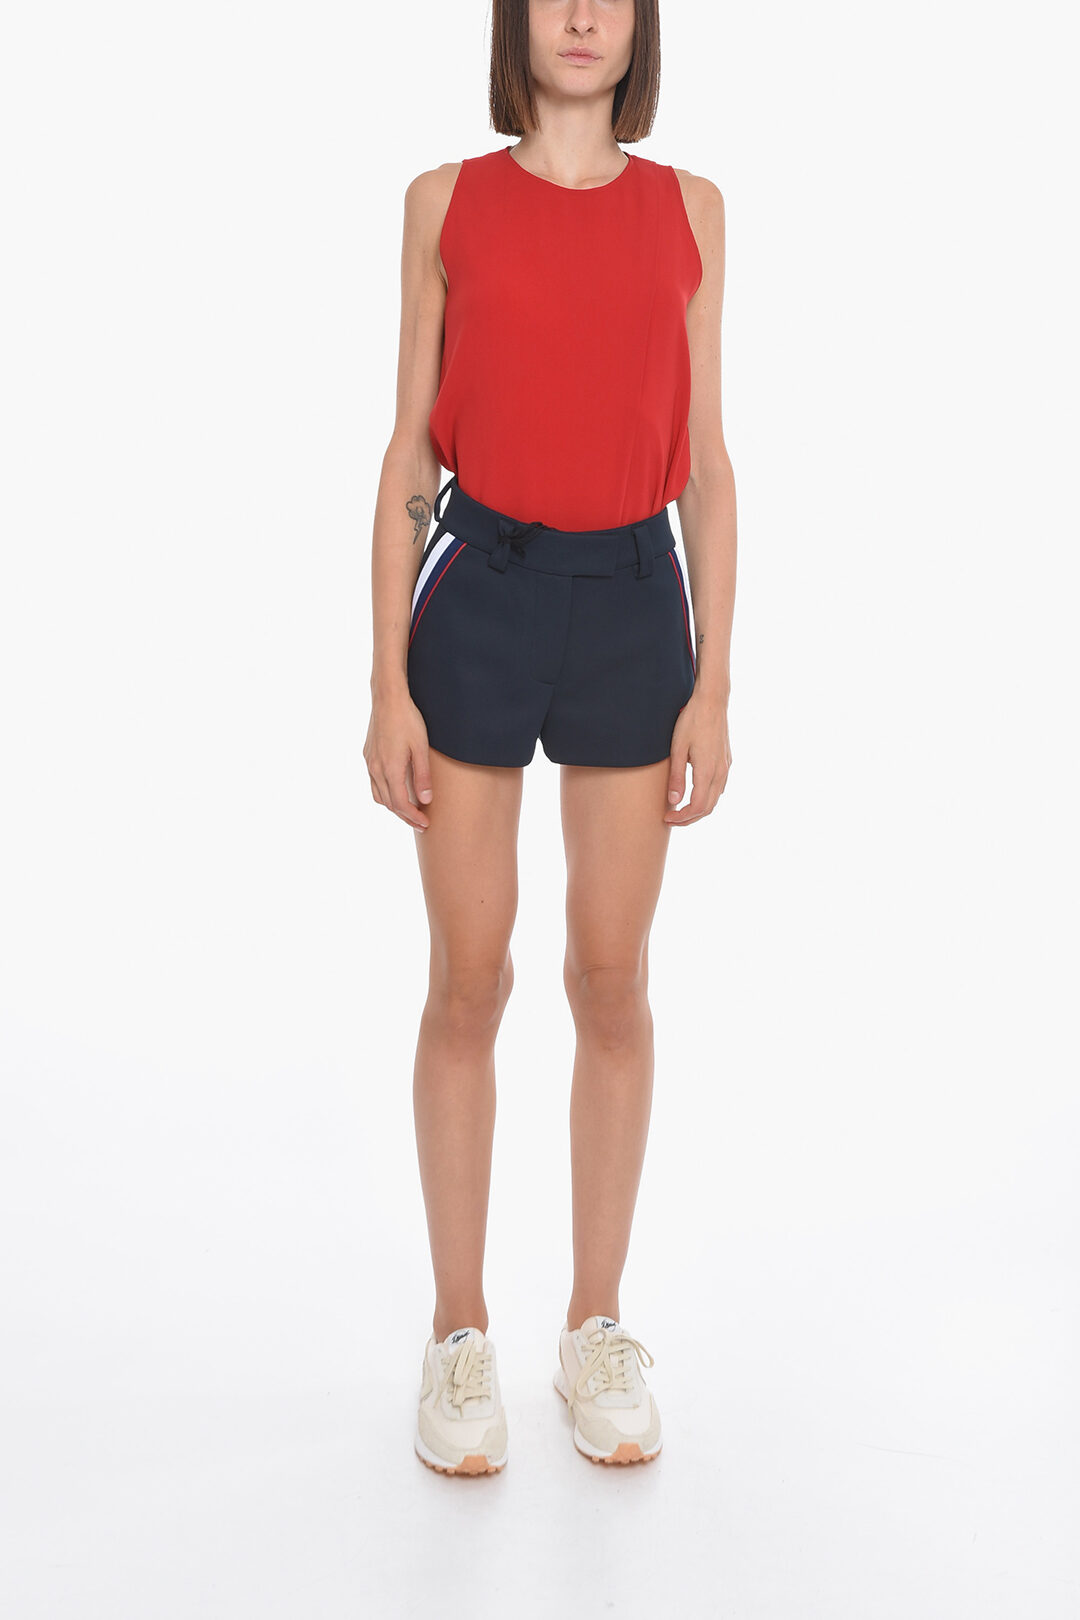 https://data.glamood.com/imgprodotto/tech-jersey-ammi-shorts-with-contrasting-bands_1400621_zoom.jpg